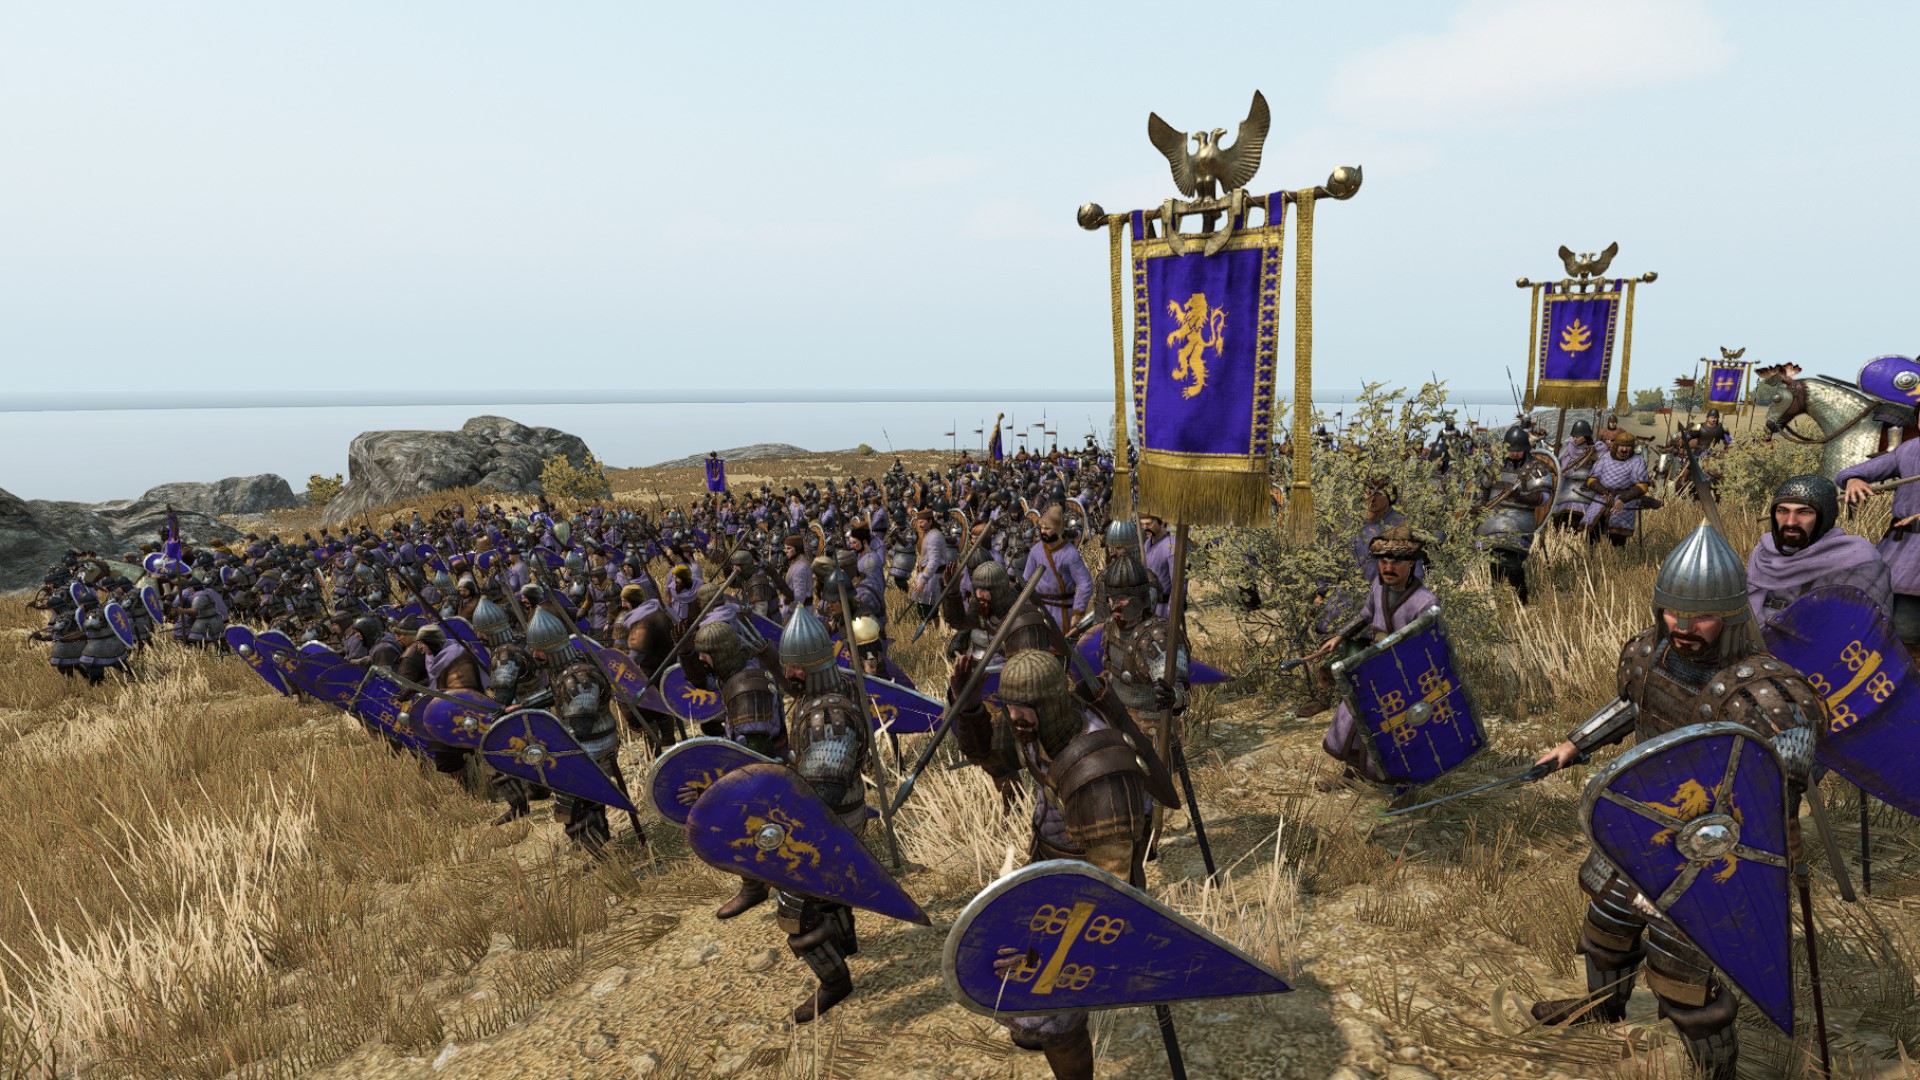 Mount & Blade II: Bannerlord leaves Early Access with actual banners